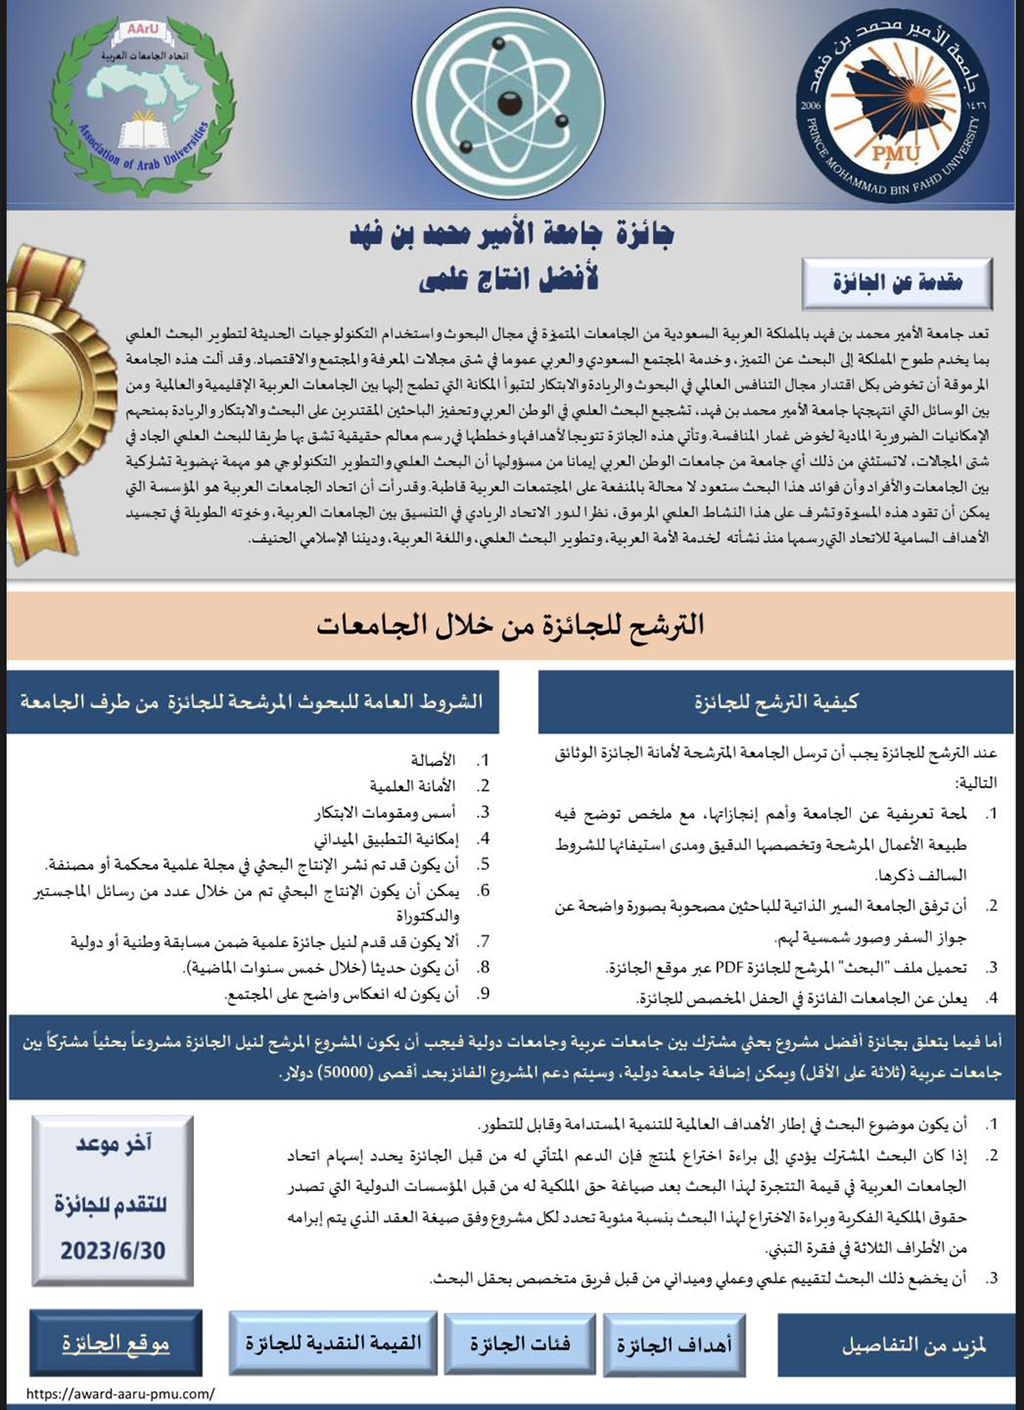 Launching the Prince Muhammad bin Fahd University Award for Best Scientific Production